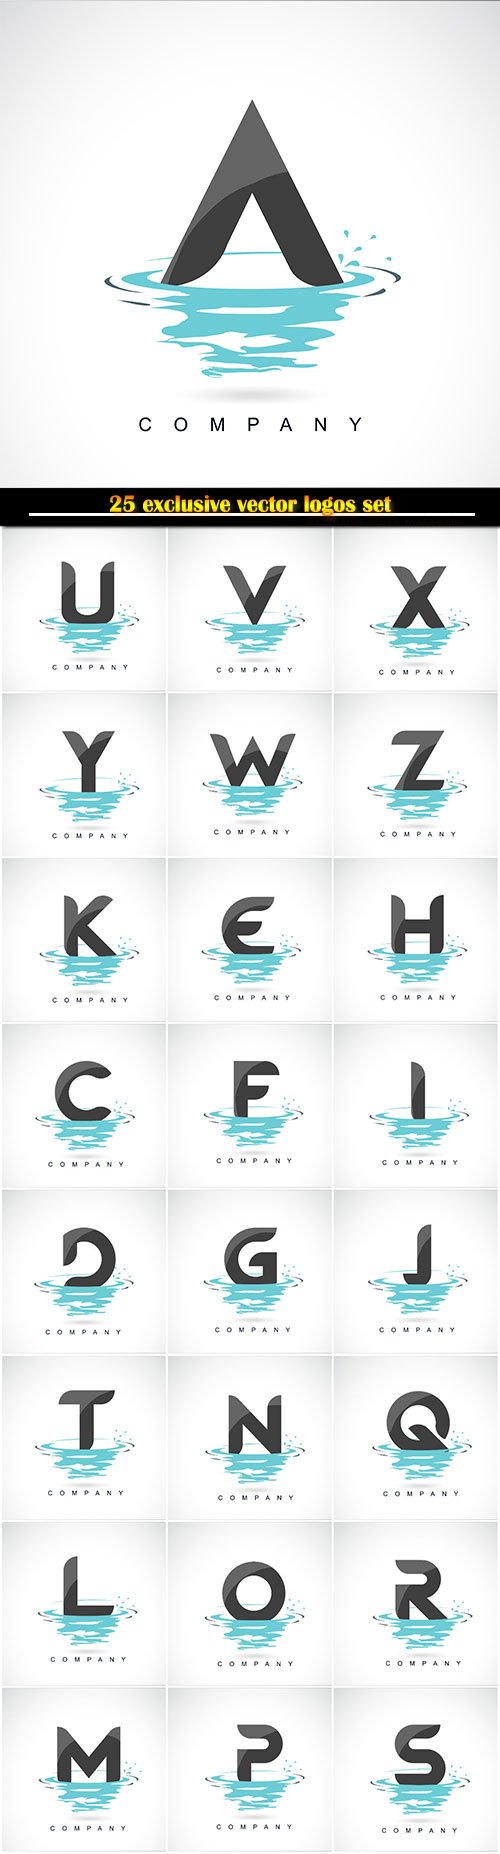 Letter logo vector design with water splash ripples drops reflection